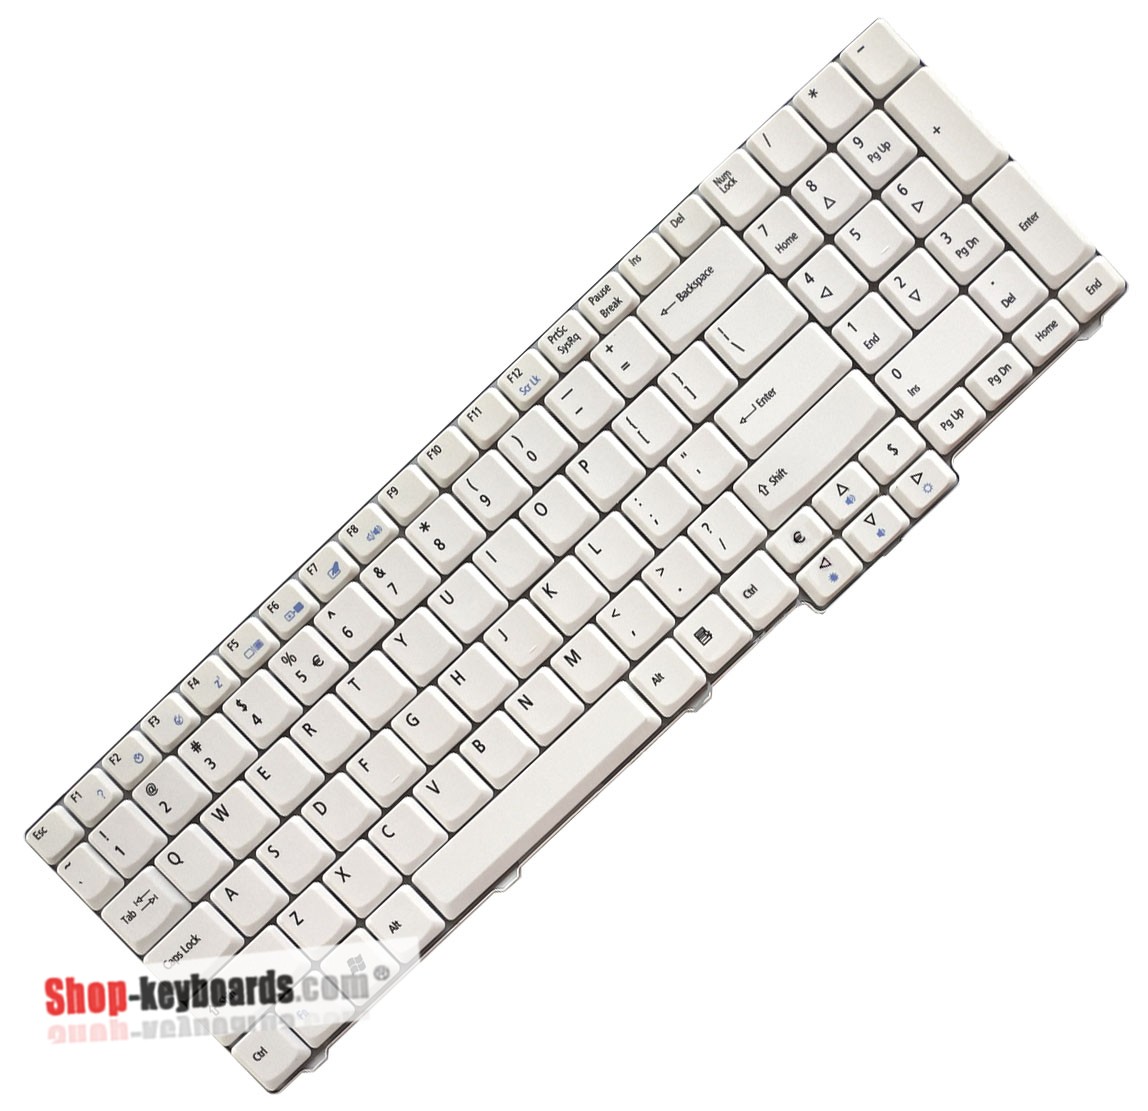 Acer Aspire 8735G-6502 Keyboard replacement